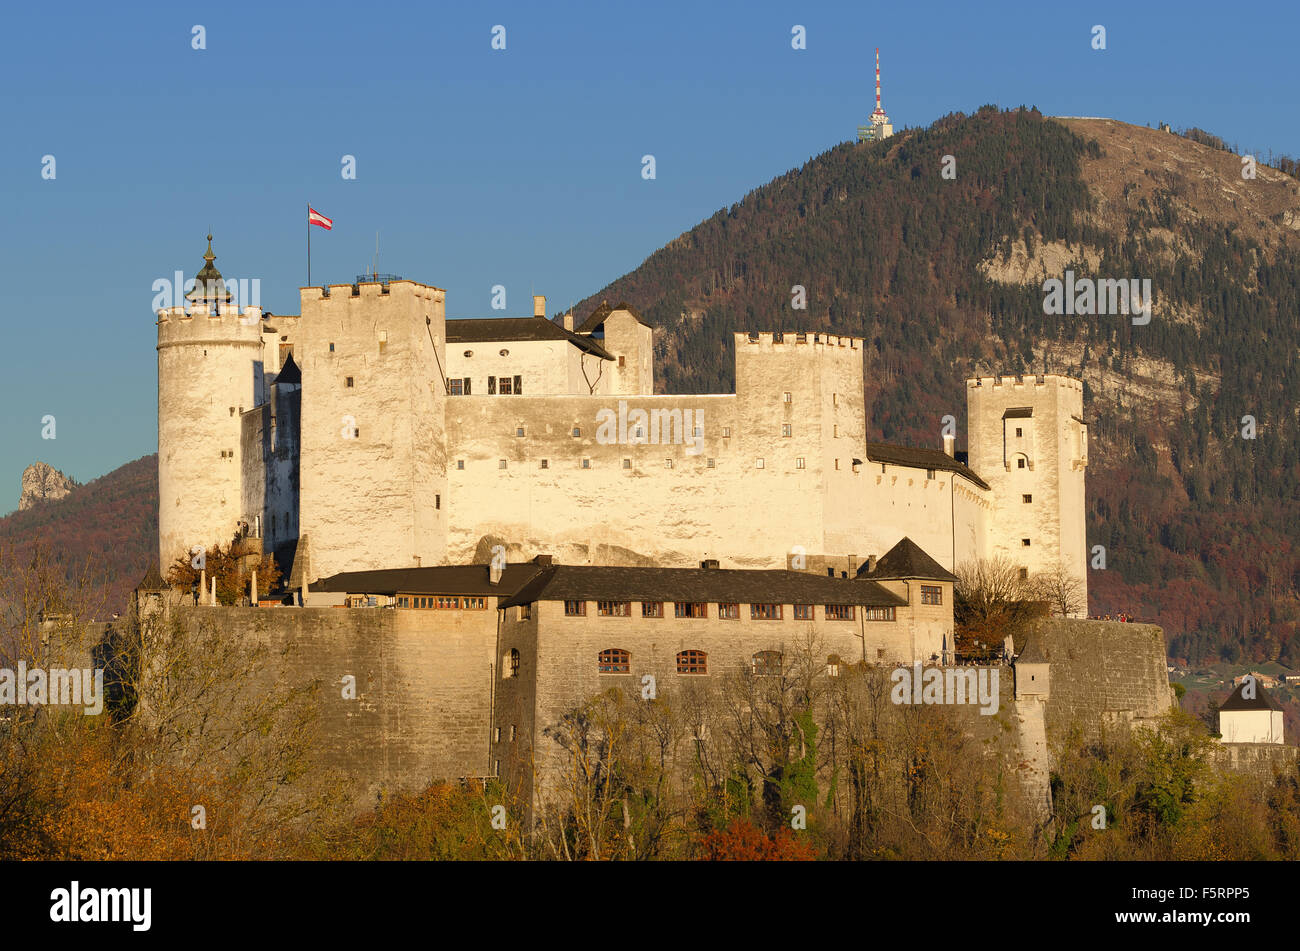 Salzburg fortress Hohensalzburg in Austria. Castle in front of Gaisberg mountain on the right and the Nockstein on the left. Stock Photo